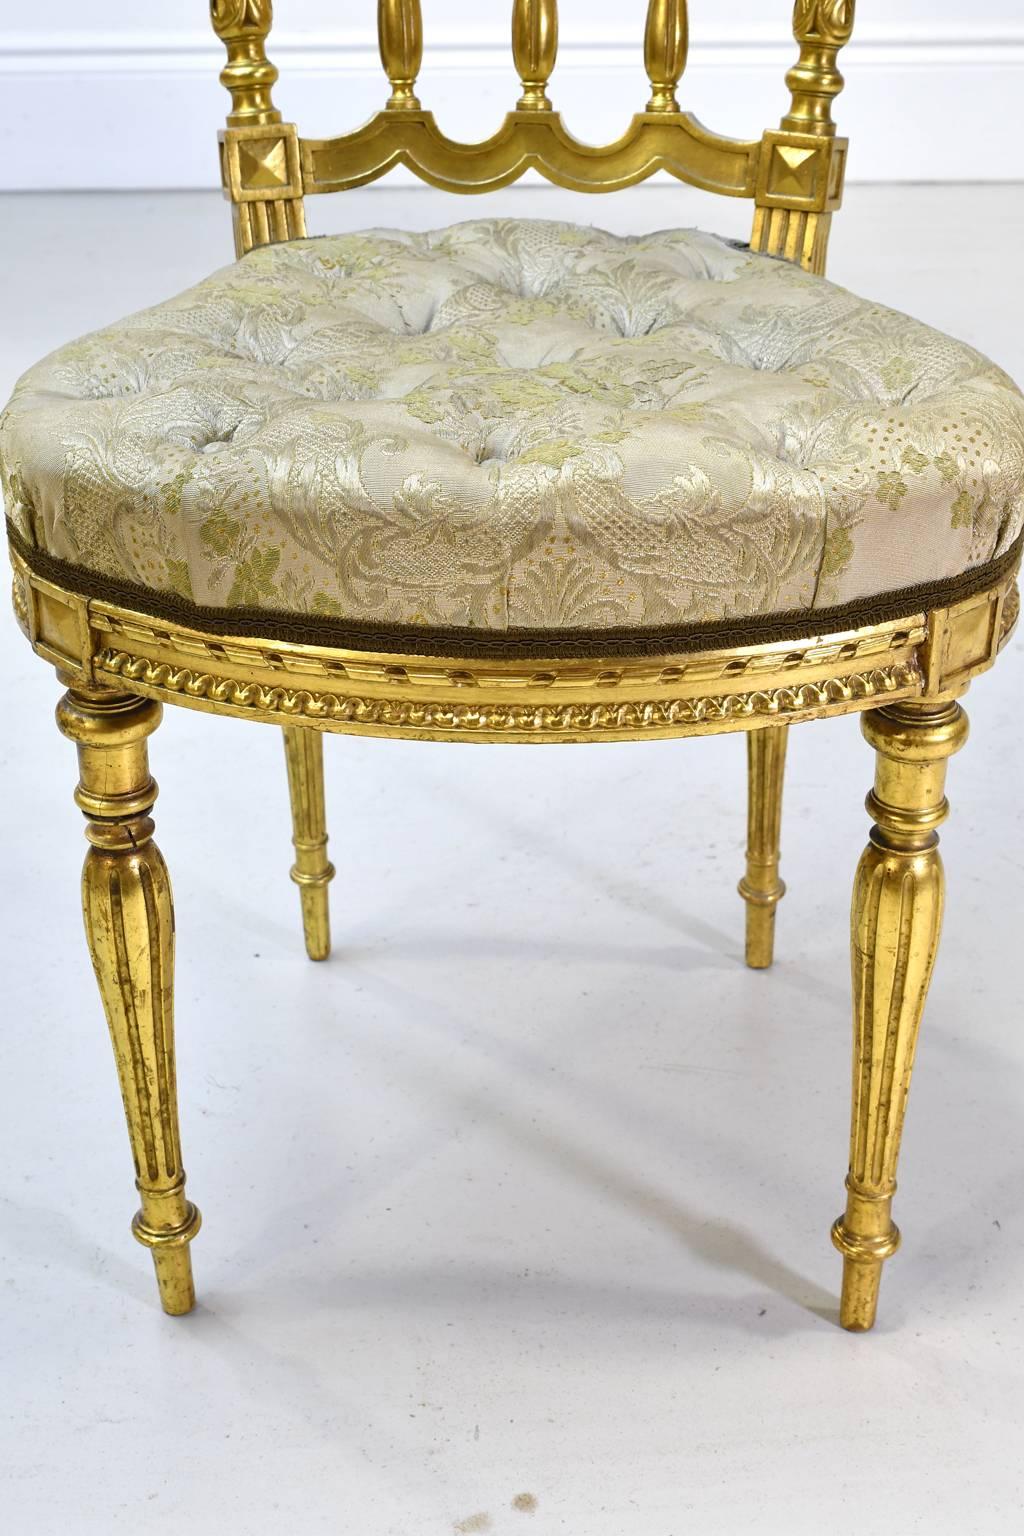 Belle Époque French Louis XVI Style Gilded Chair with Upholstered Seat, c 1900  For Sale 3